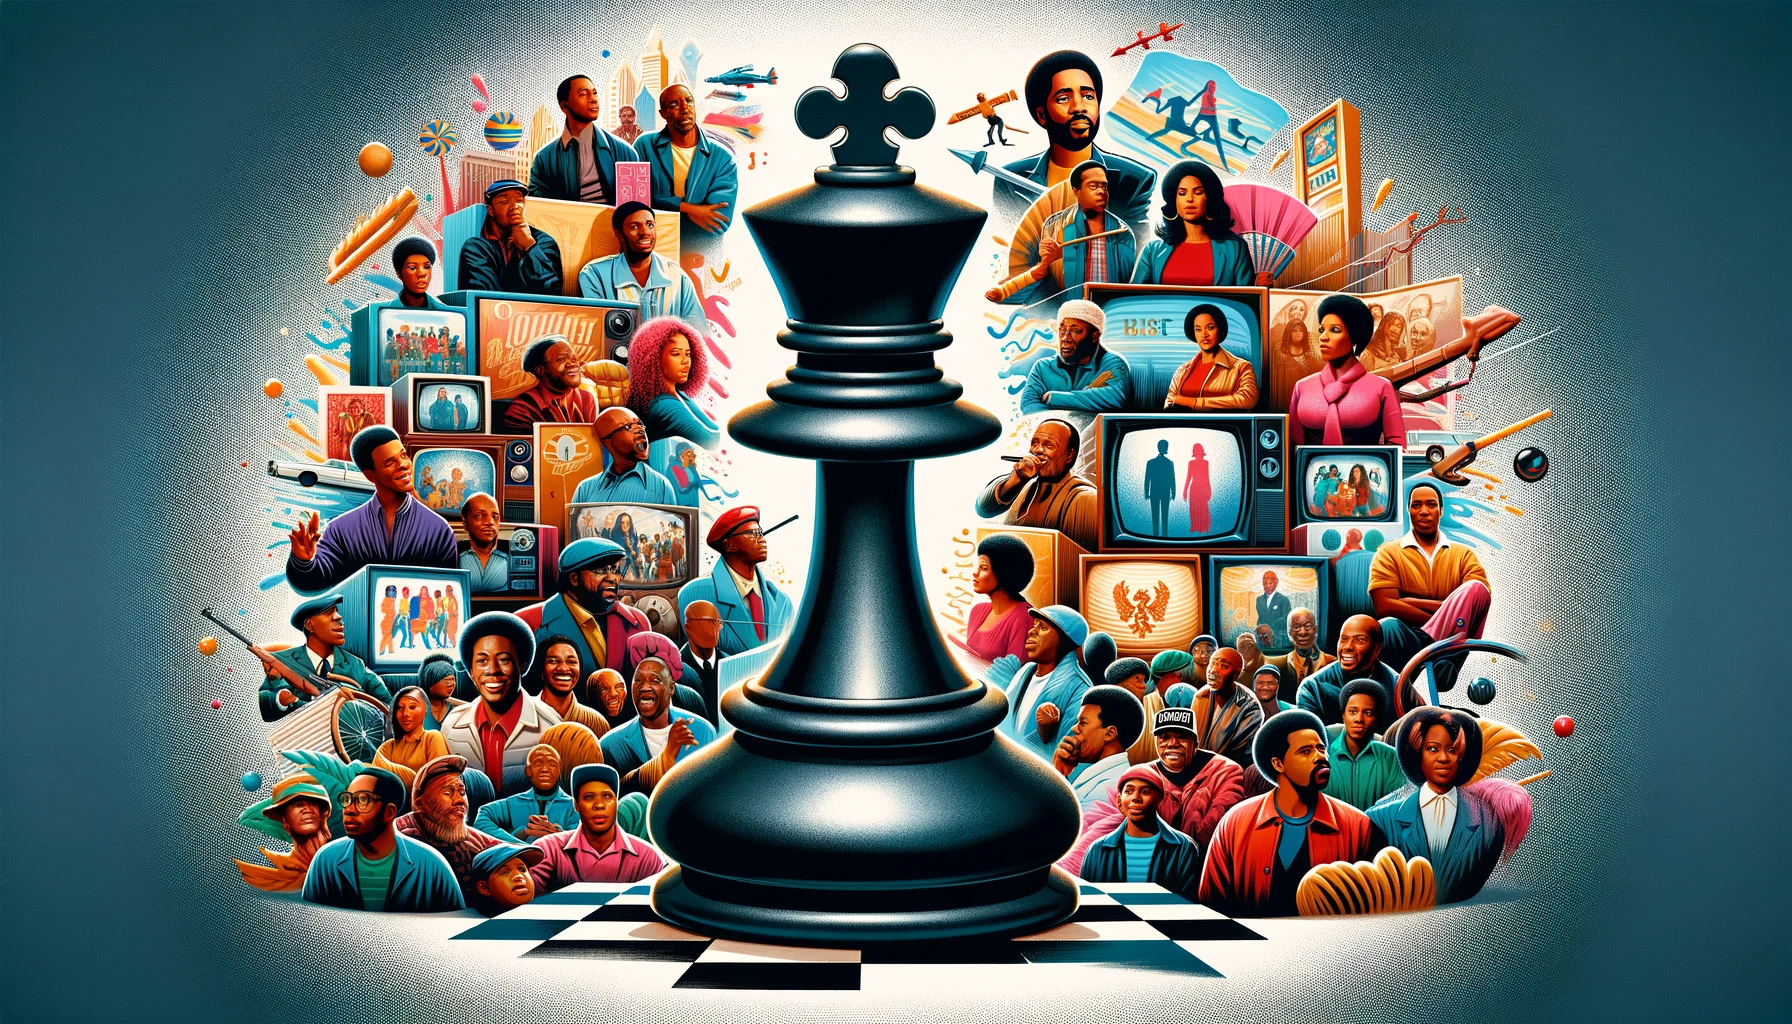 A king chess piece surrounded by figures from black content. 